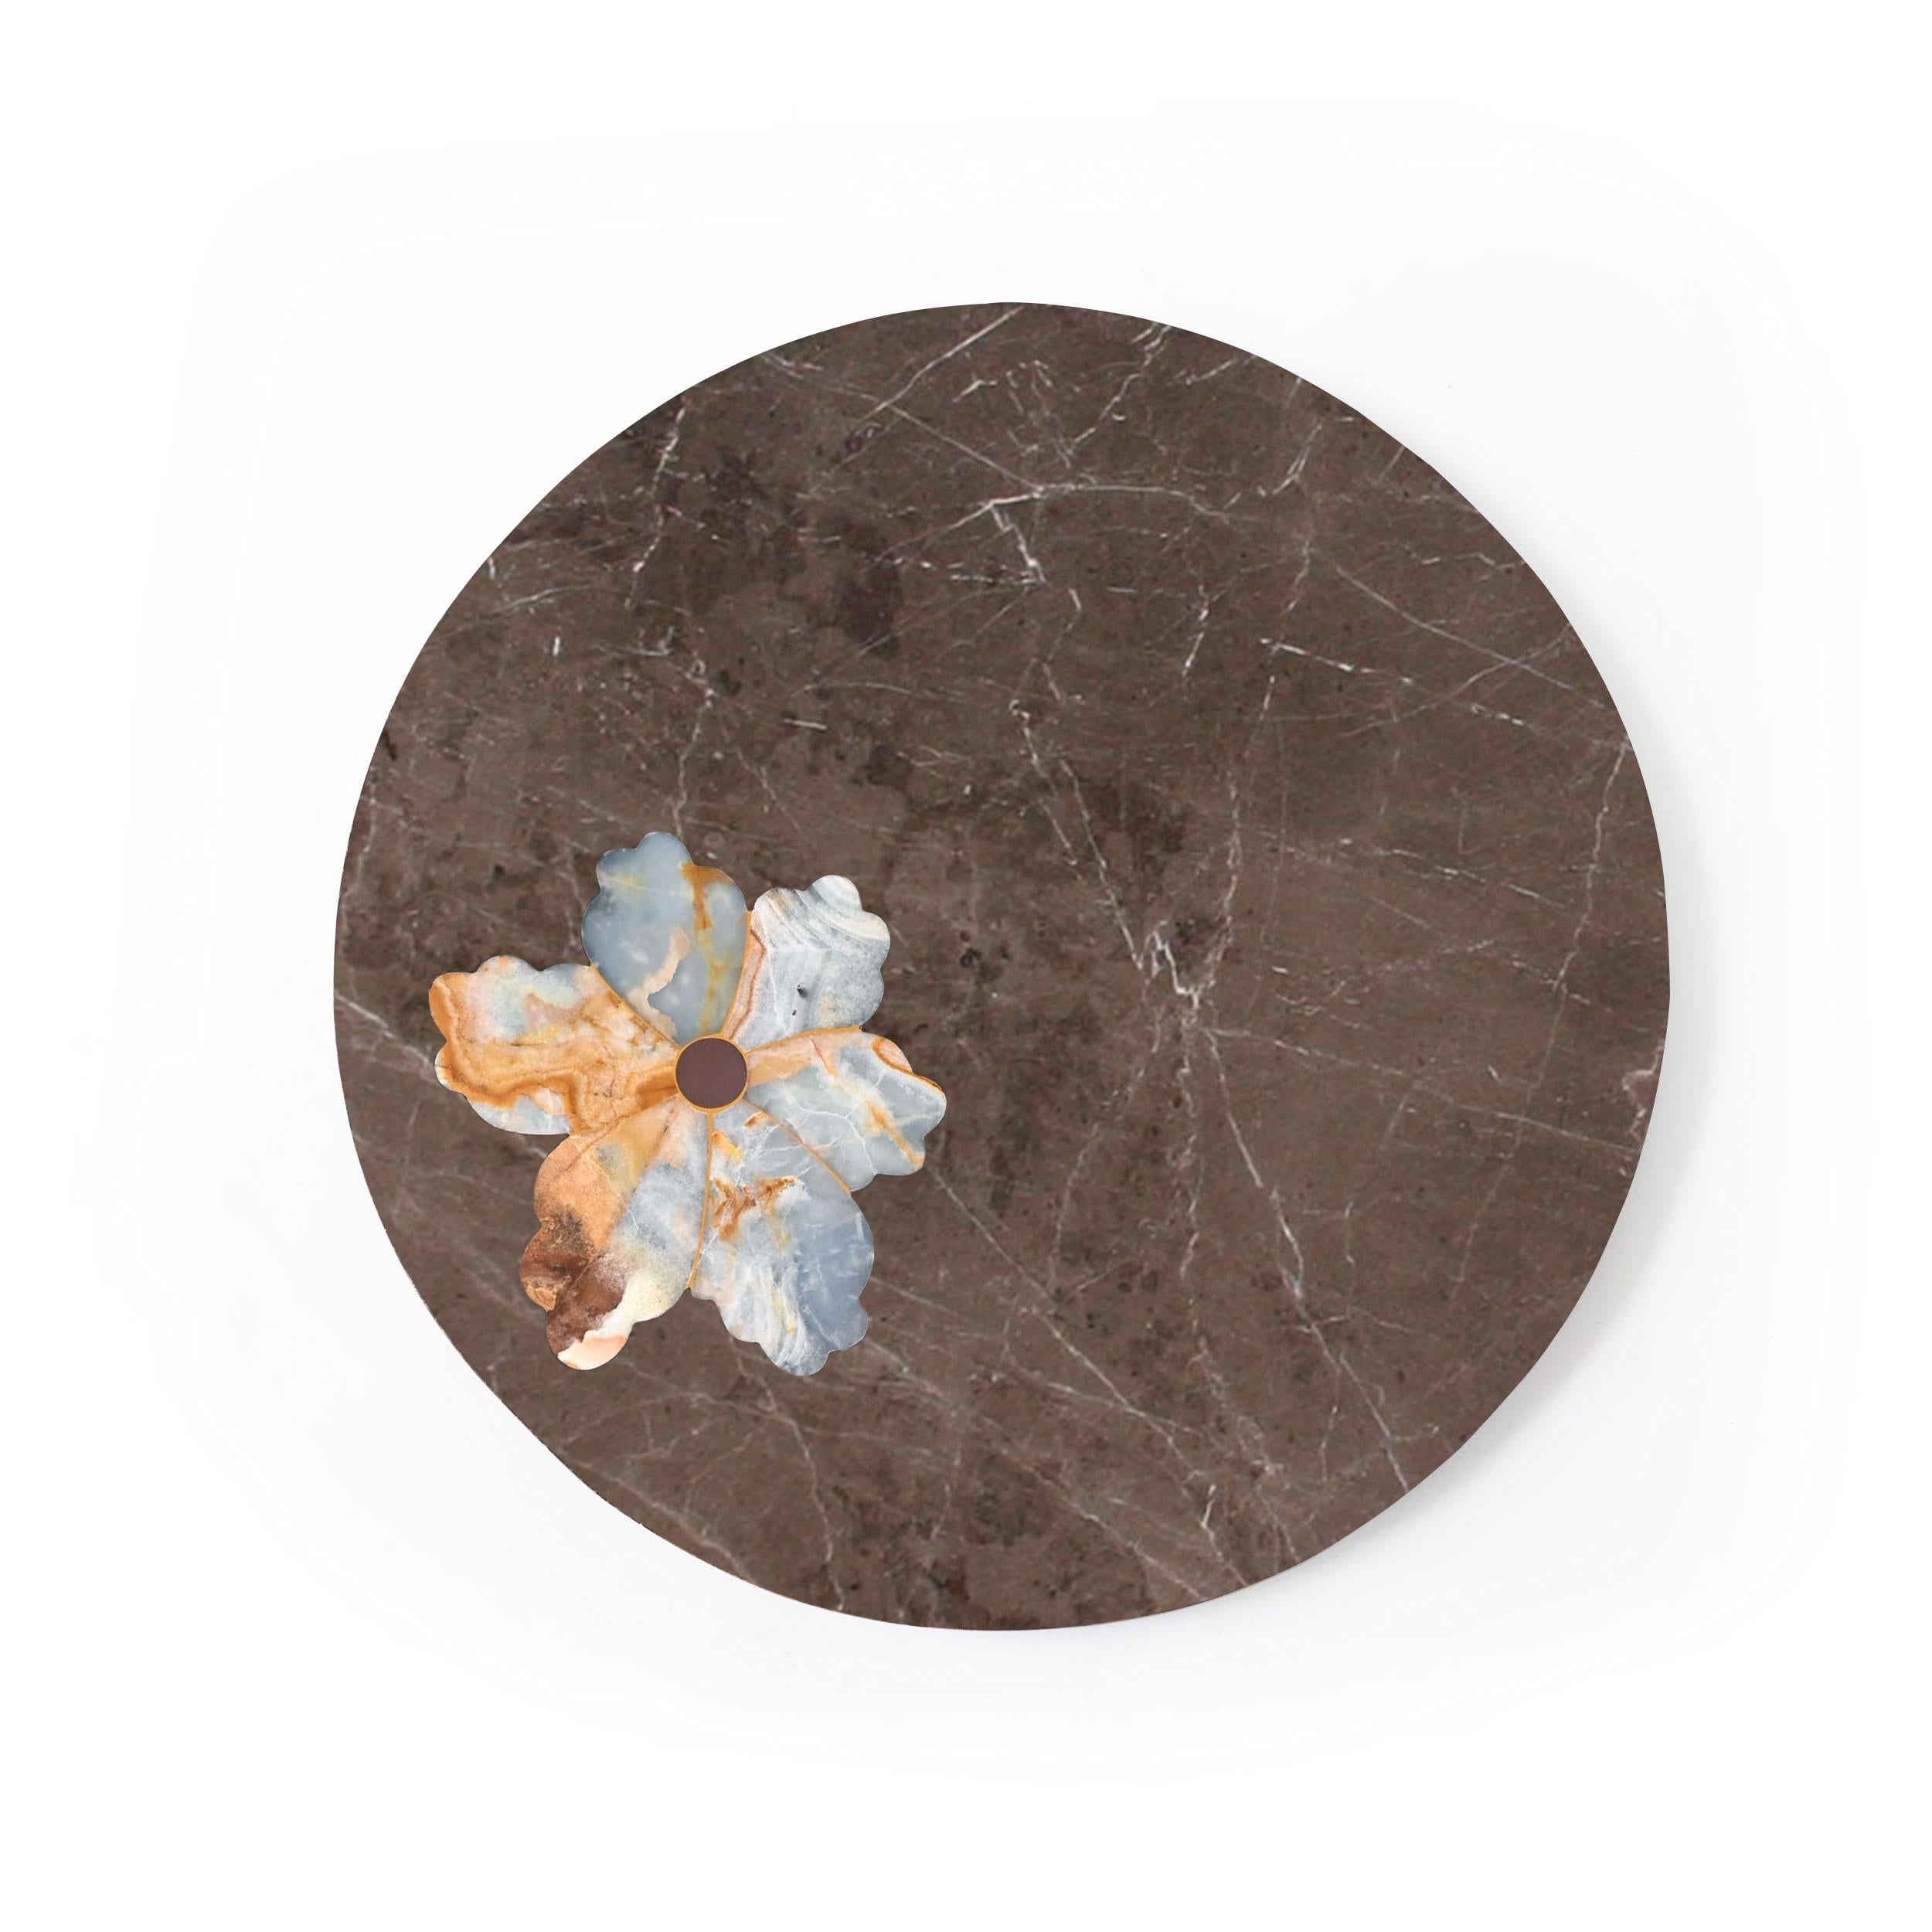 Bloom platter I by Studio Lel
Dimensions: D30.5 x H30.5 x H2.5 cm
Materials: Onyx, Marble

The word Ara is the onomatopoeic genus of the macaw, referencing the sounds made by the bright parrots depicted in every piece of the collection. Set in